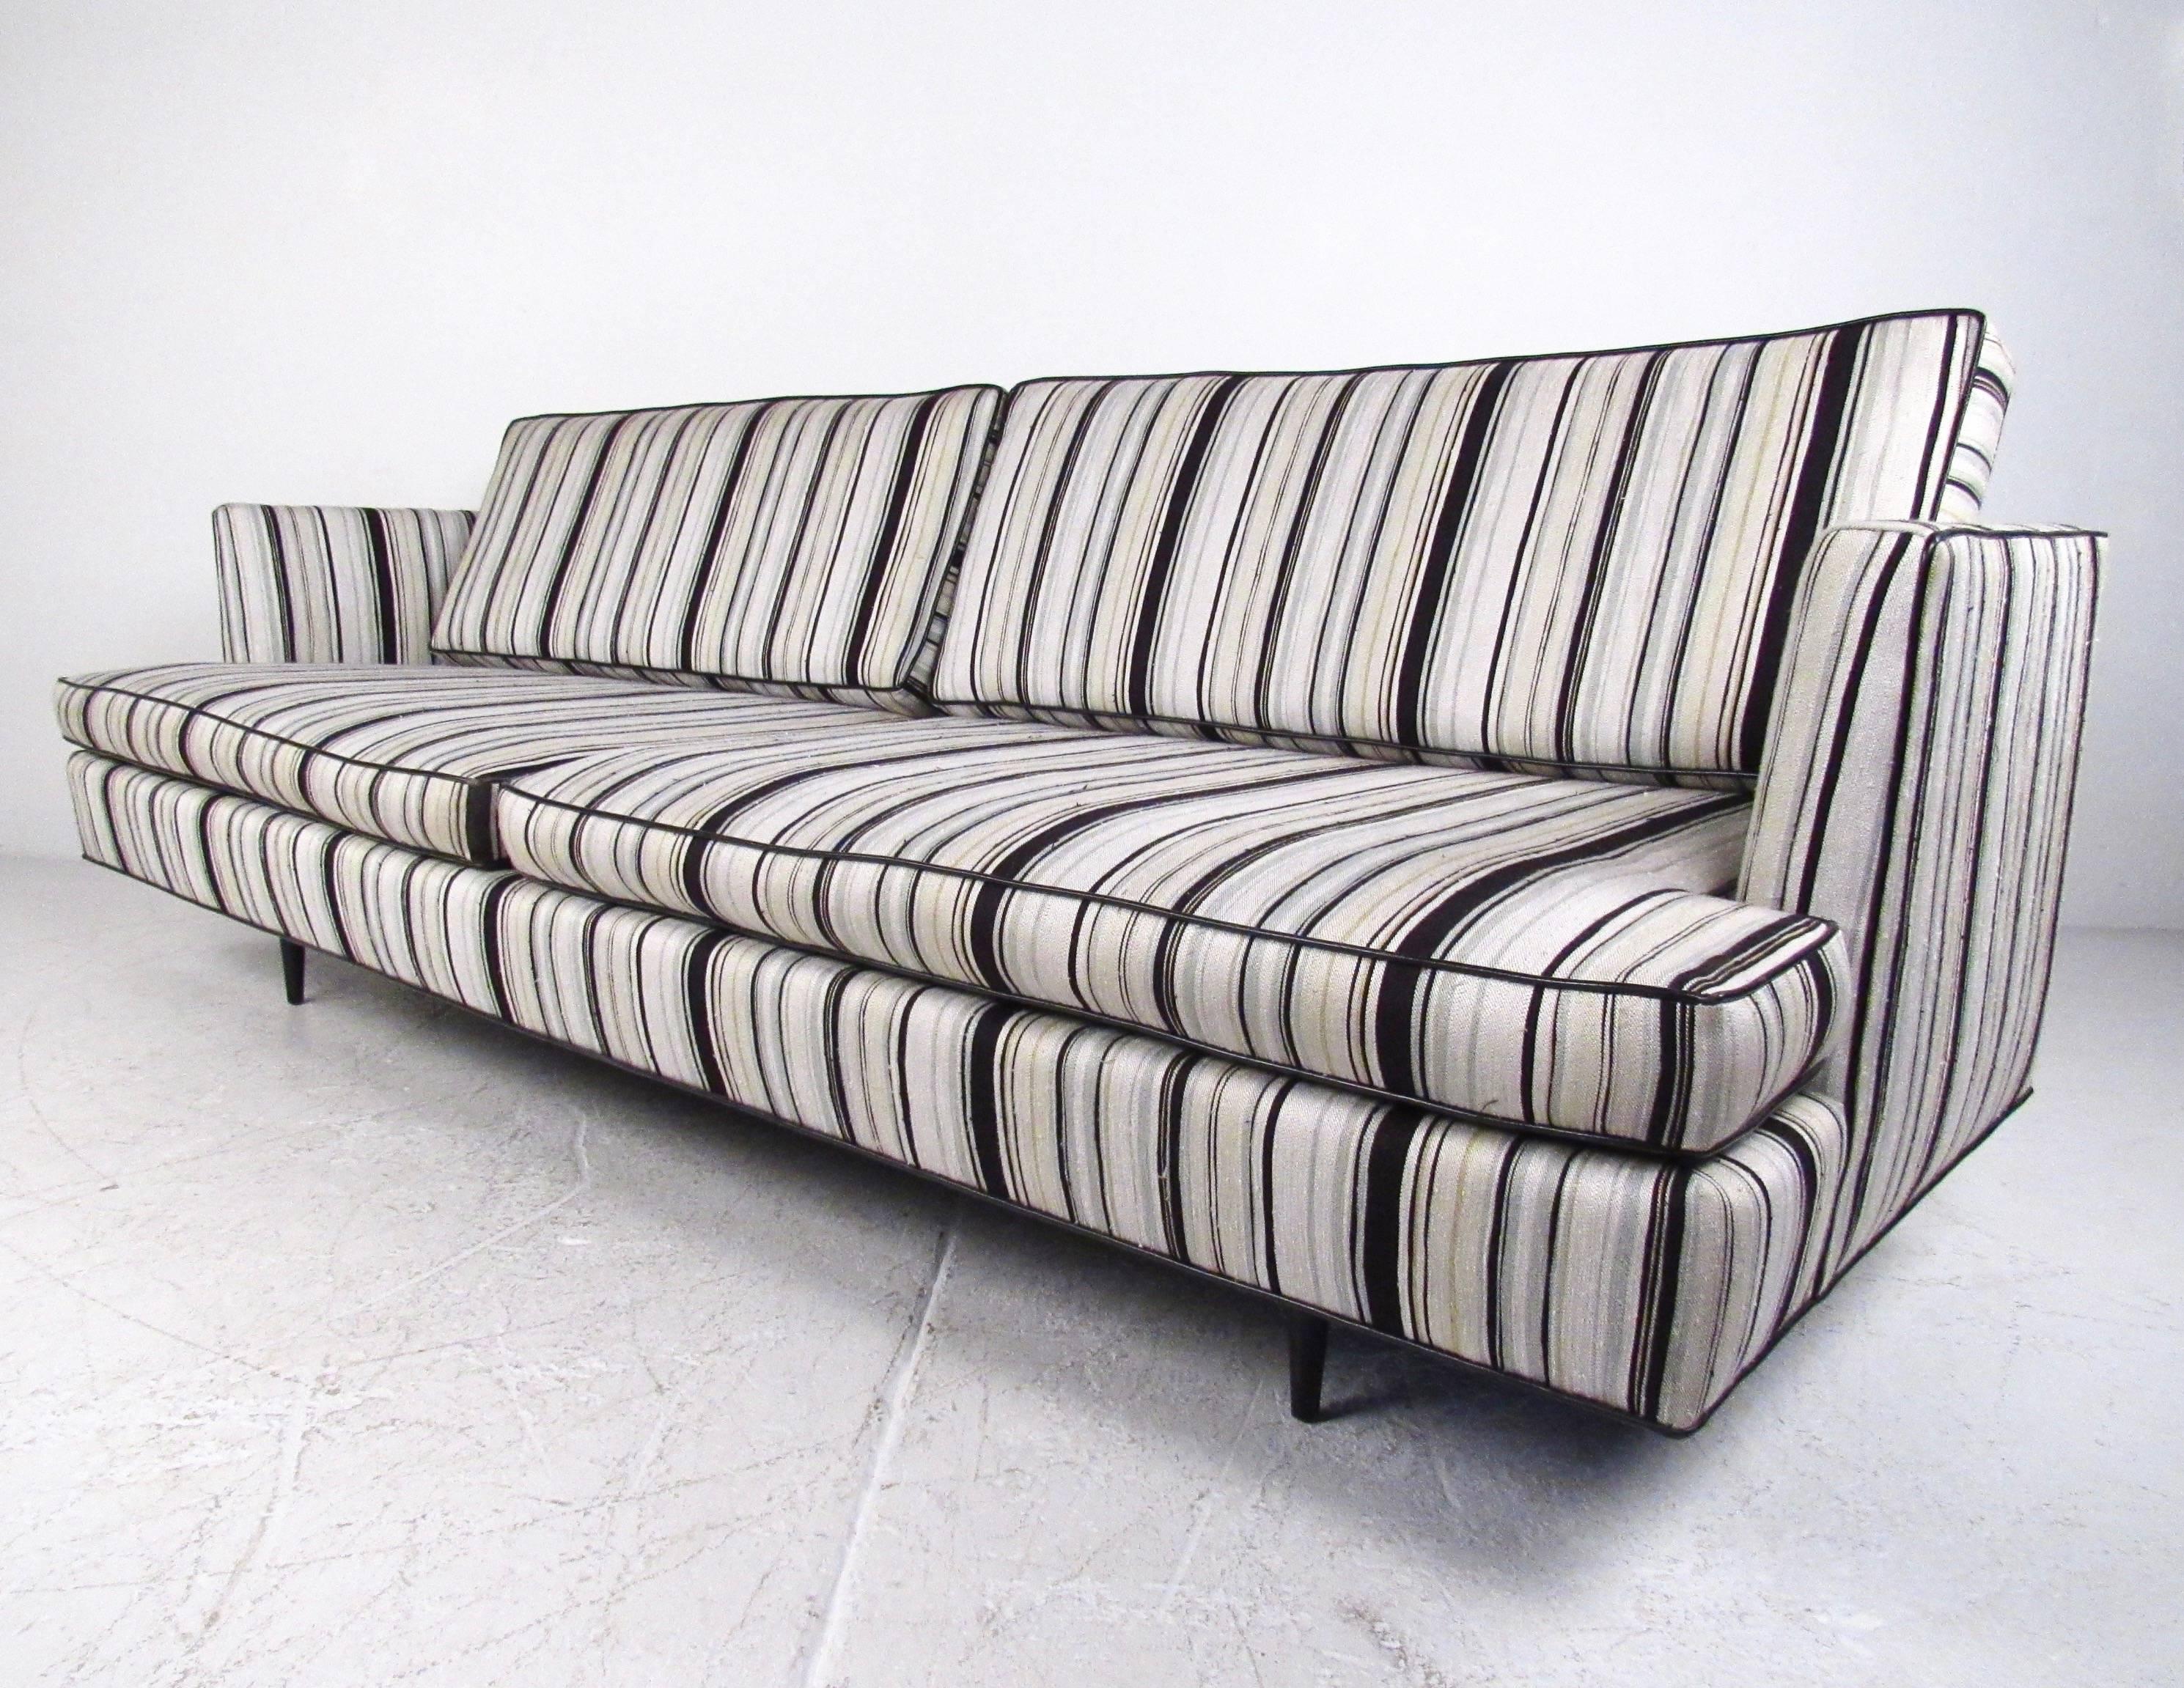 This spacious Dunbar sofa features deep upholstered seats with unique vintage striped fabric. The cutaway armrests and well-proportioned design add to the Mid-Century appeal of this large sofa, making it an impressive addition to any seating area.